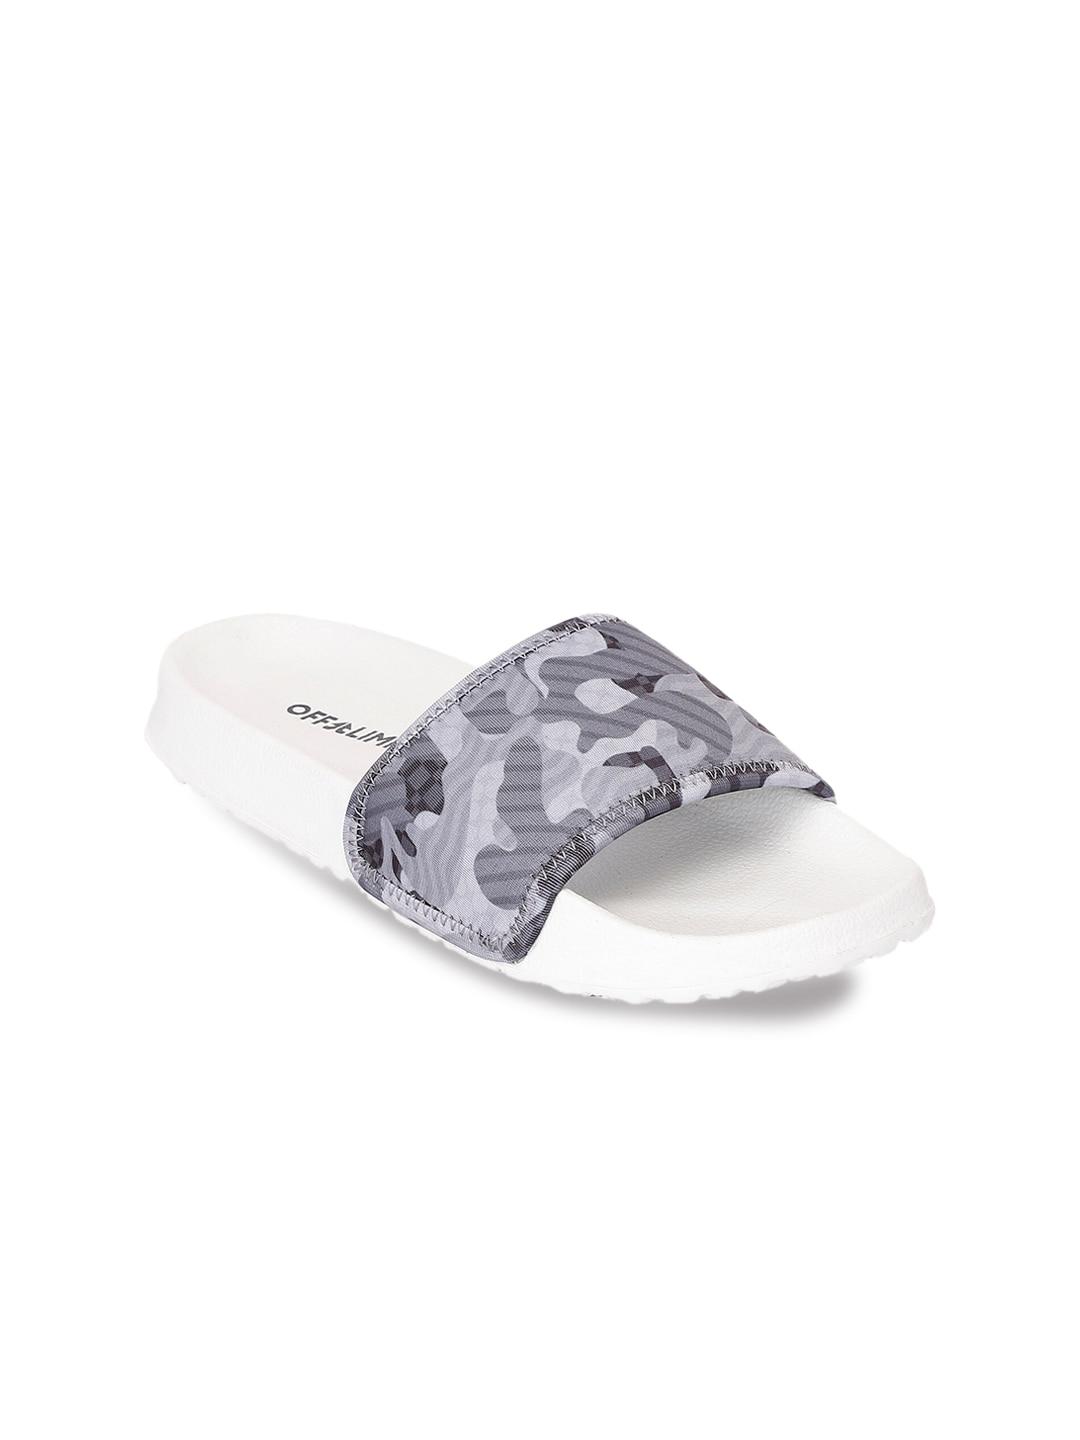 off-limits-women-grey-&-white-camouflage-printed-sliders